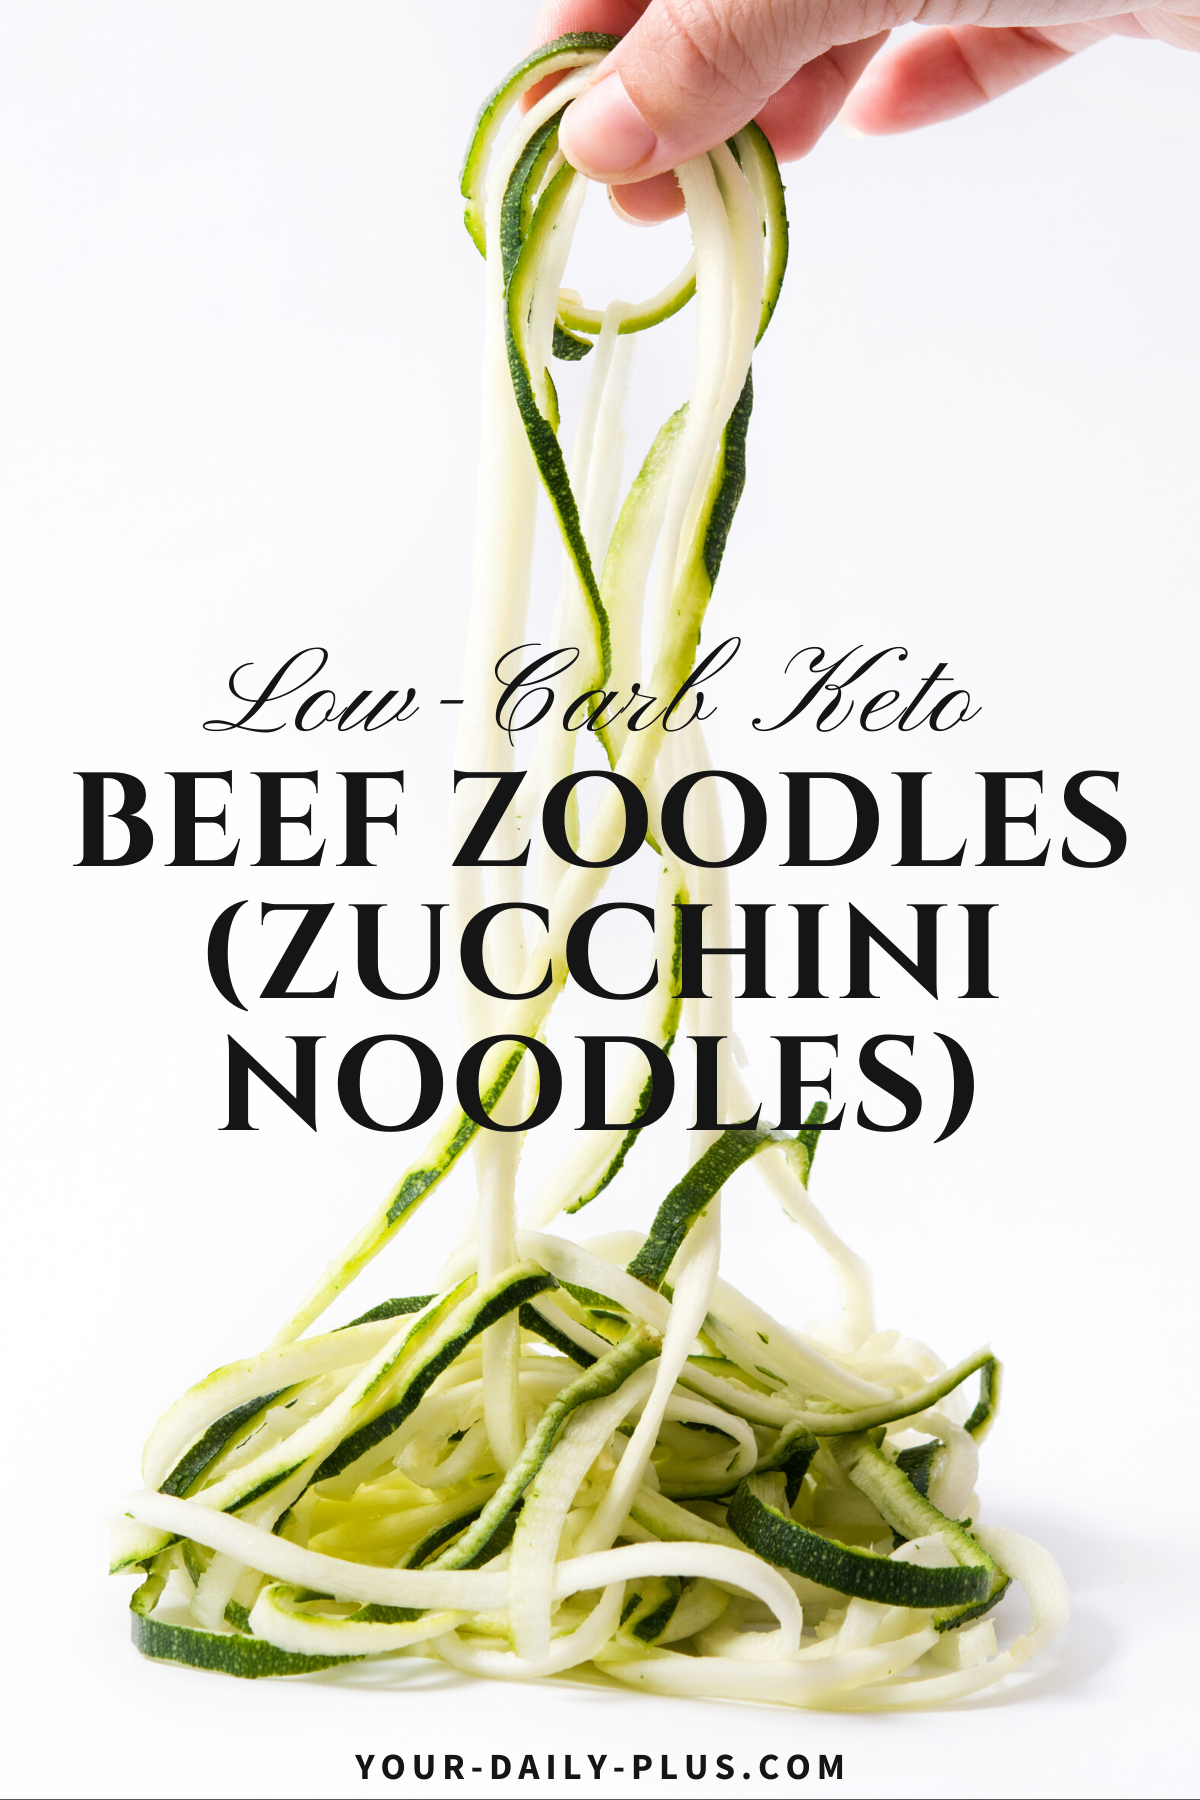 You’re going to love these creamy noodles that are all Keto and full of flavor. We’ve subbed traditional noodles with zucchini noodles for bold flavor but a totally noodle texture. The noodles are paired with creamy coconut milk for a totally beefy sauce you’ll love.